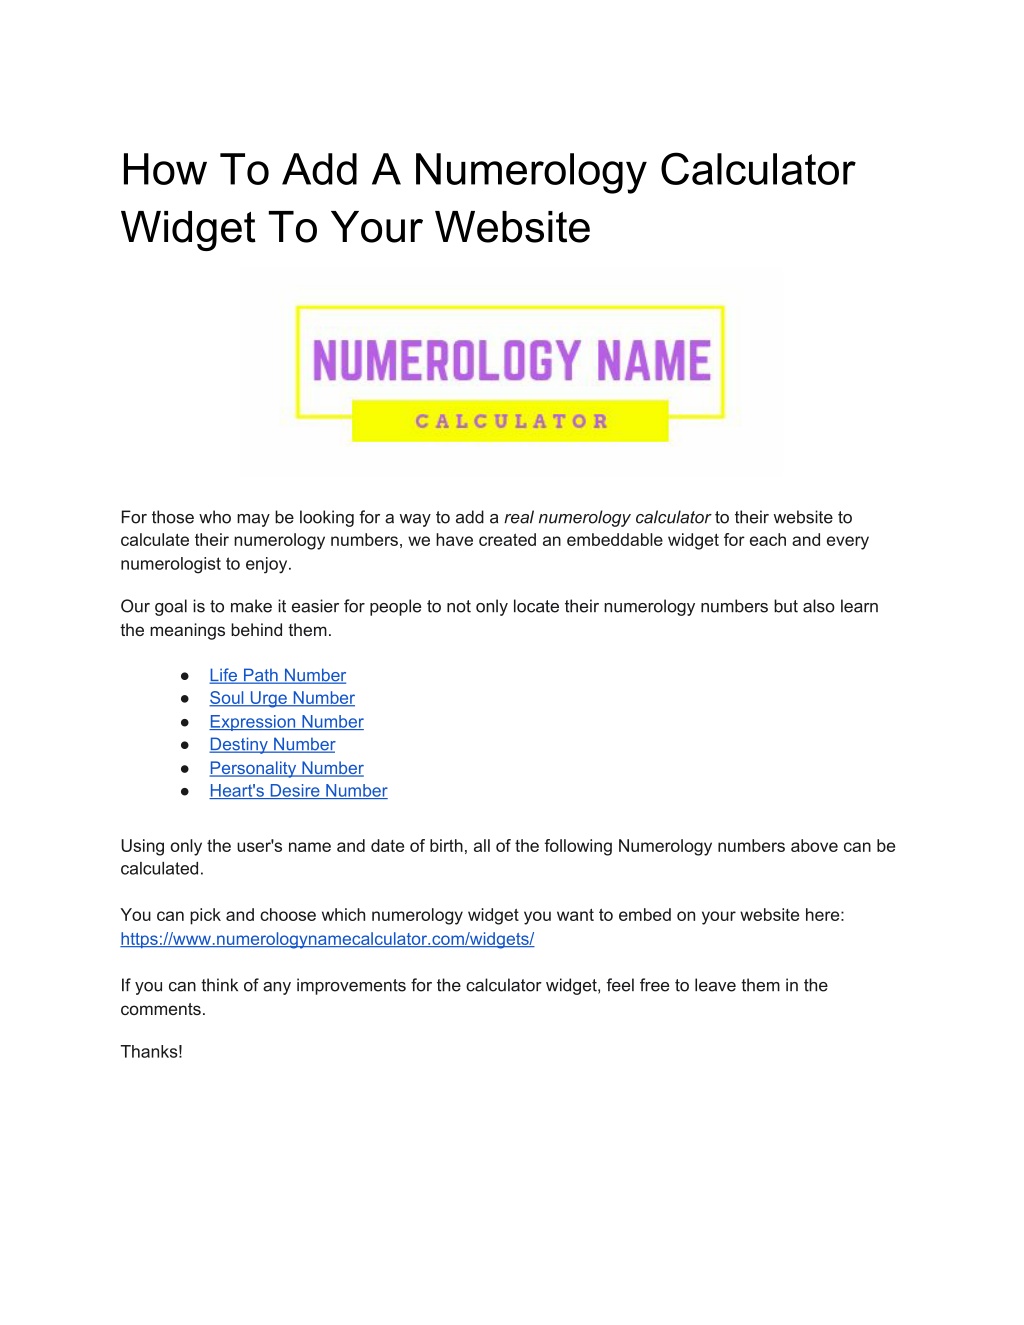 How To Calculate Your Expression Number In Numerology